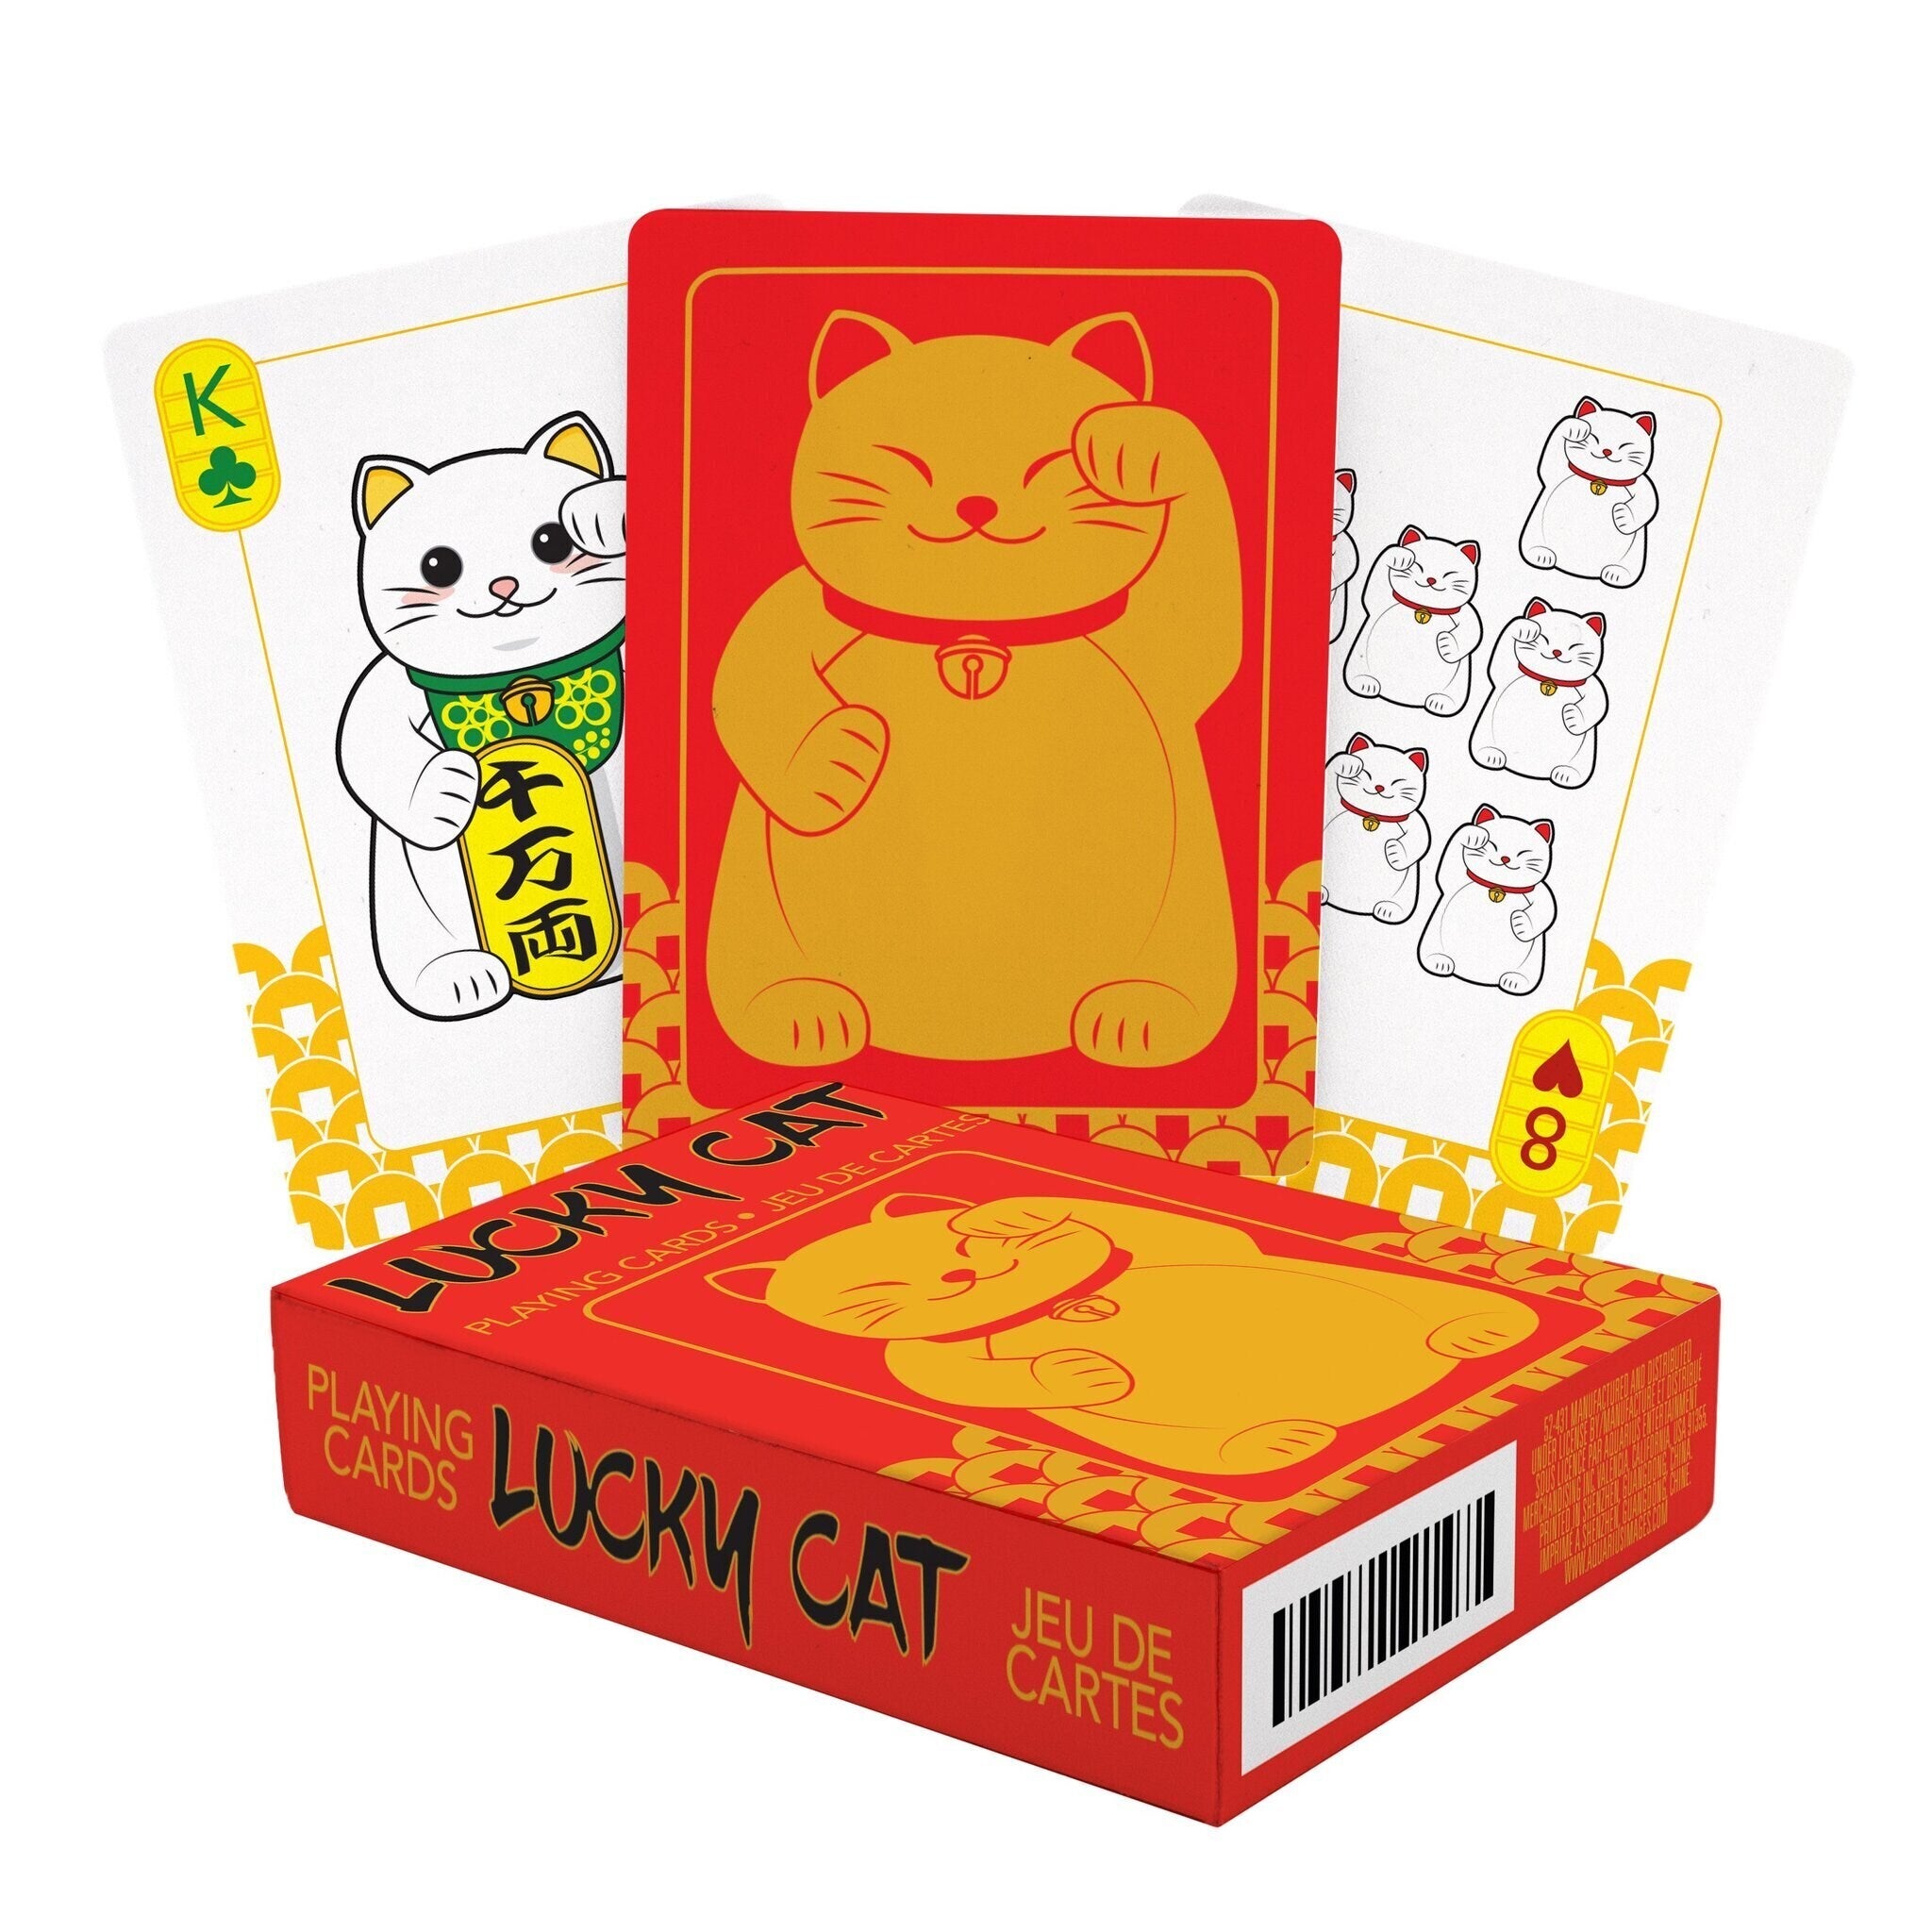 52 CARDS NEW 52431 PLAYING CARD DECK LUCKY CAT 